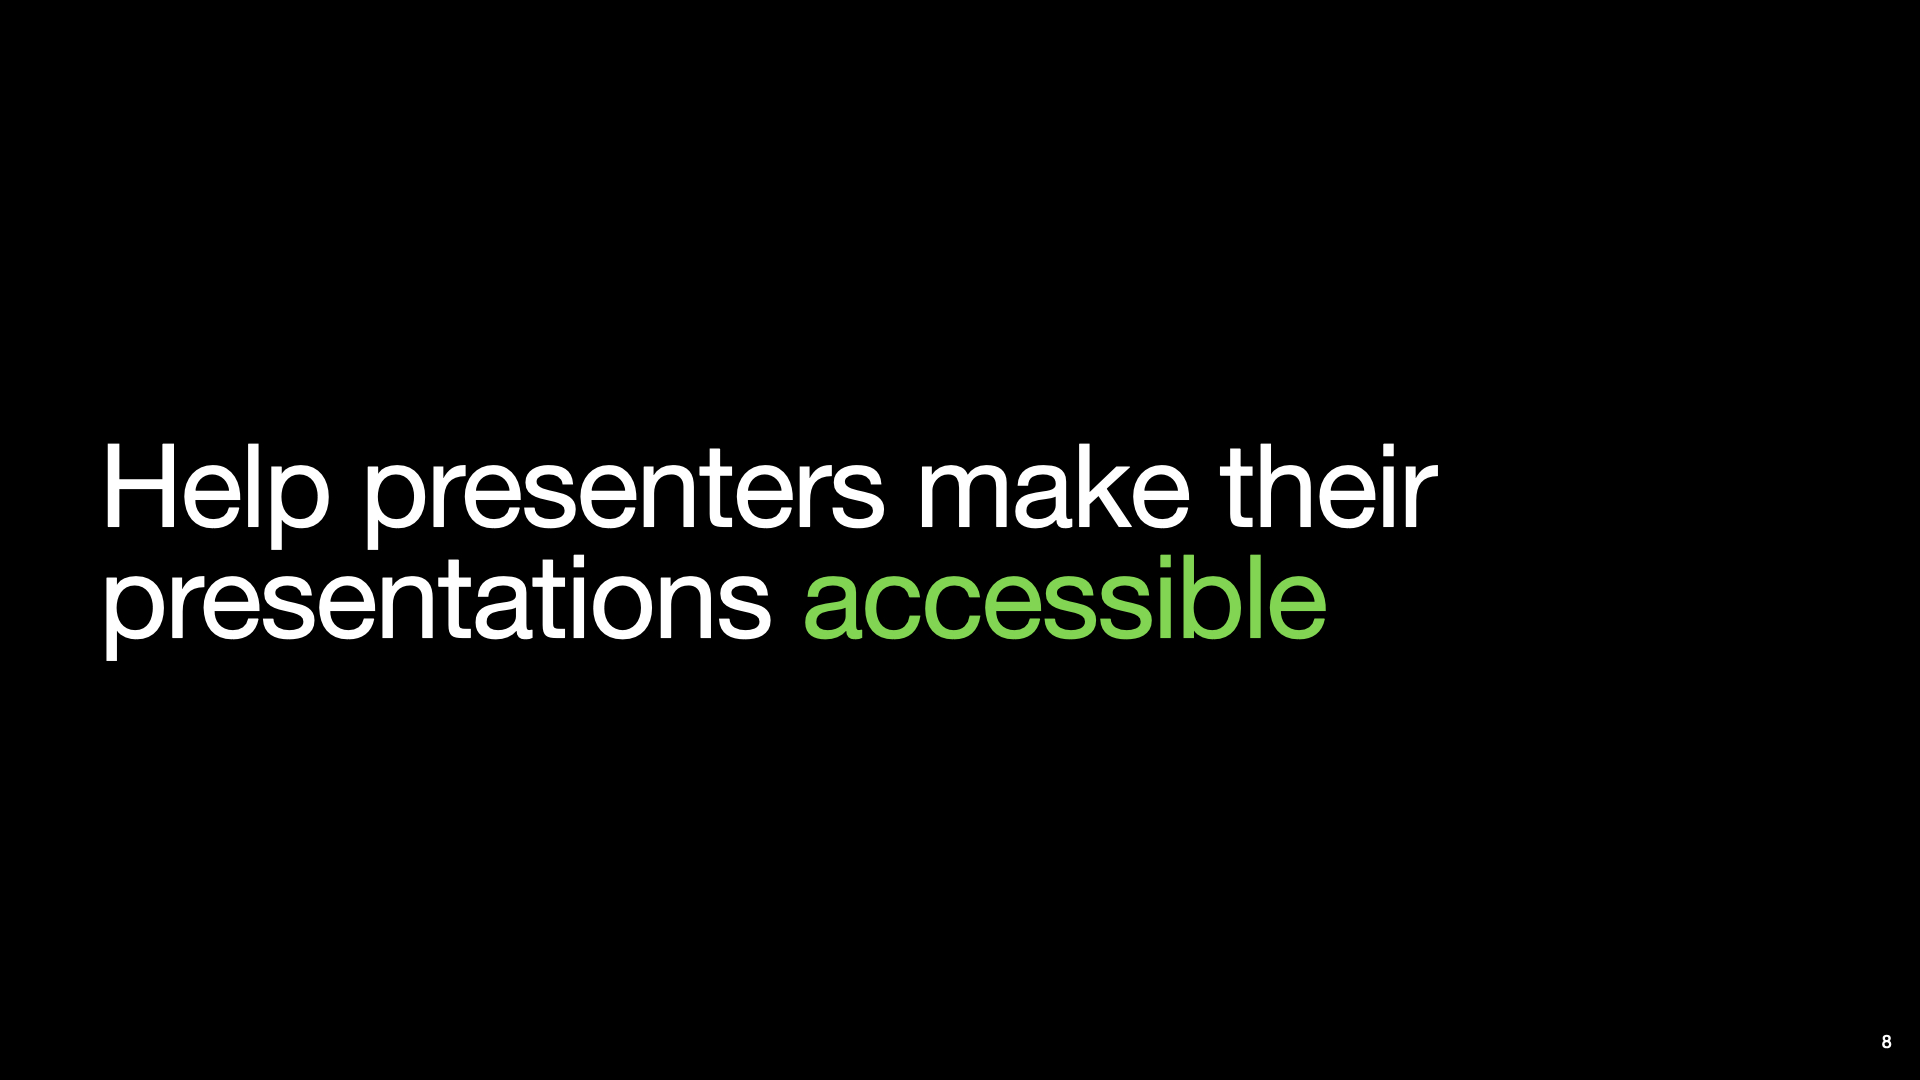 A slide with text “Help presenters make their presentations accessible” at the middle left of the slide. Text “accessible” is highlighted in green.